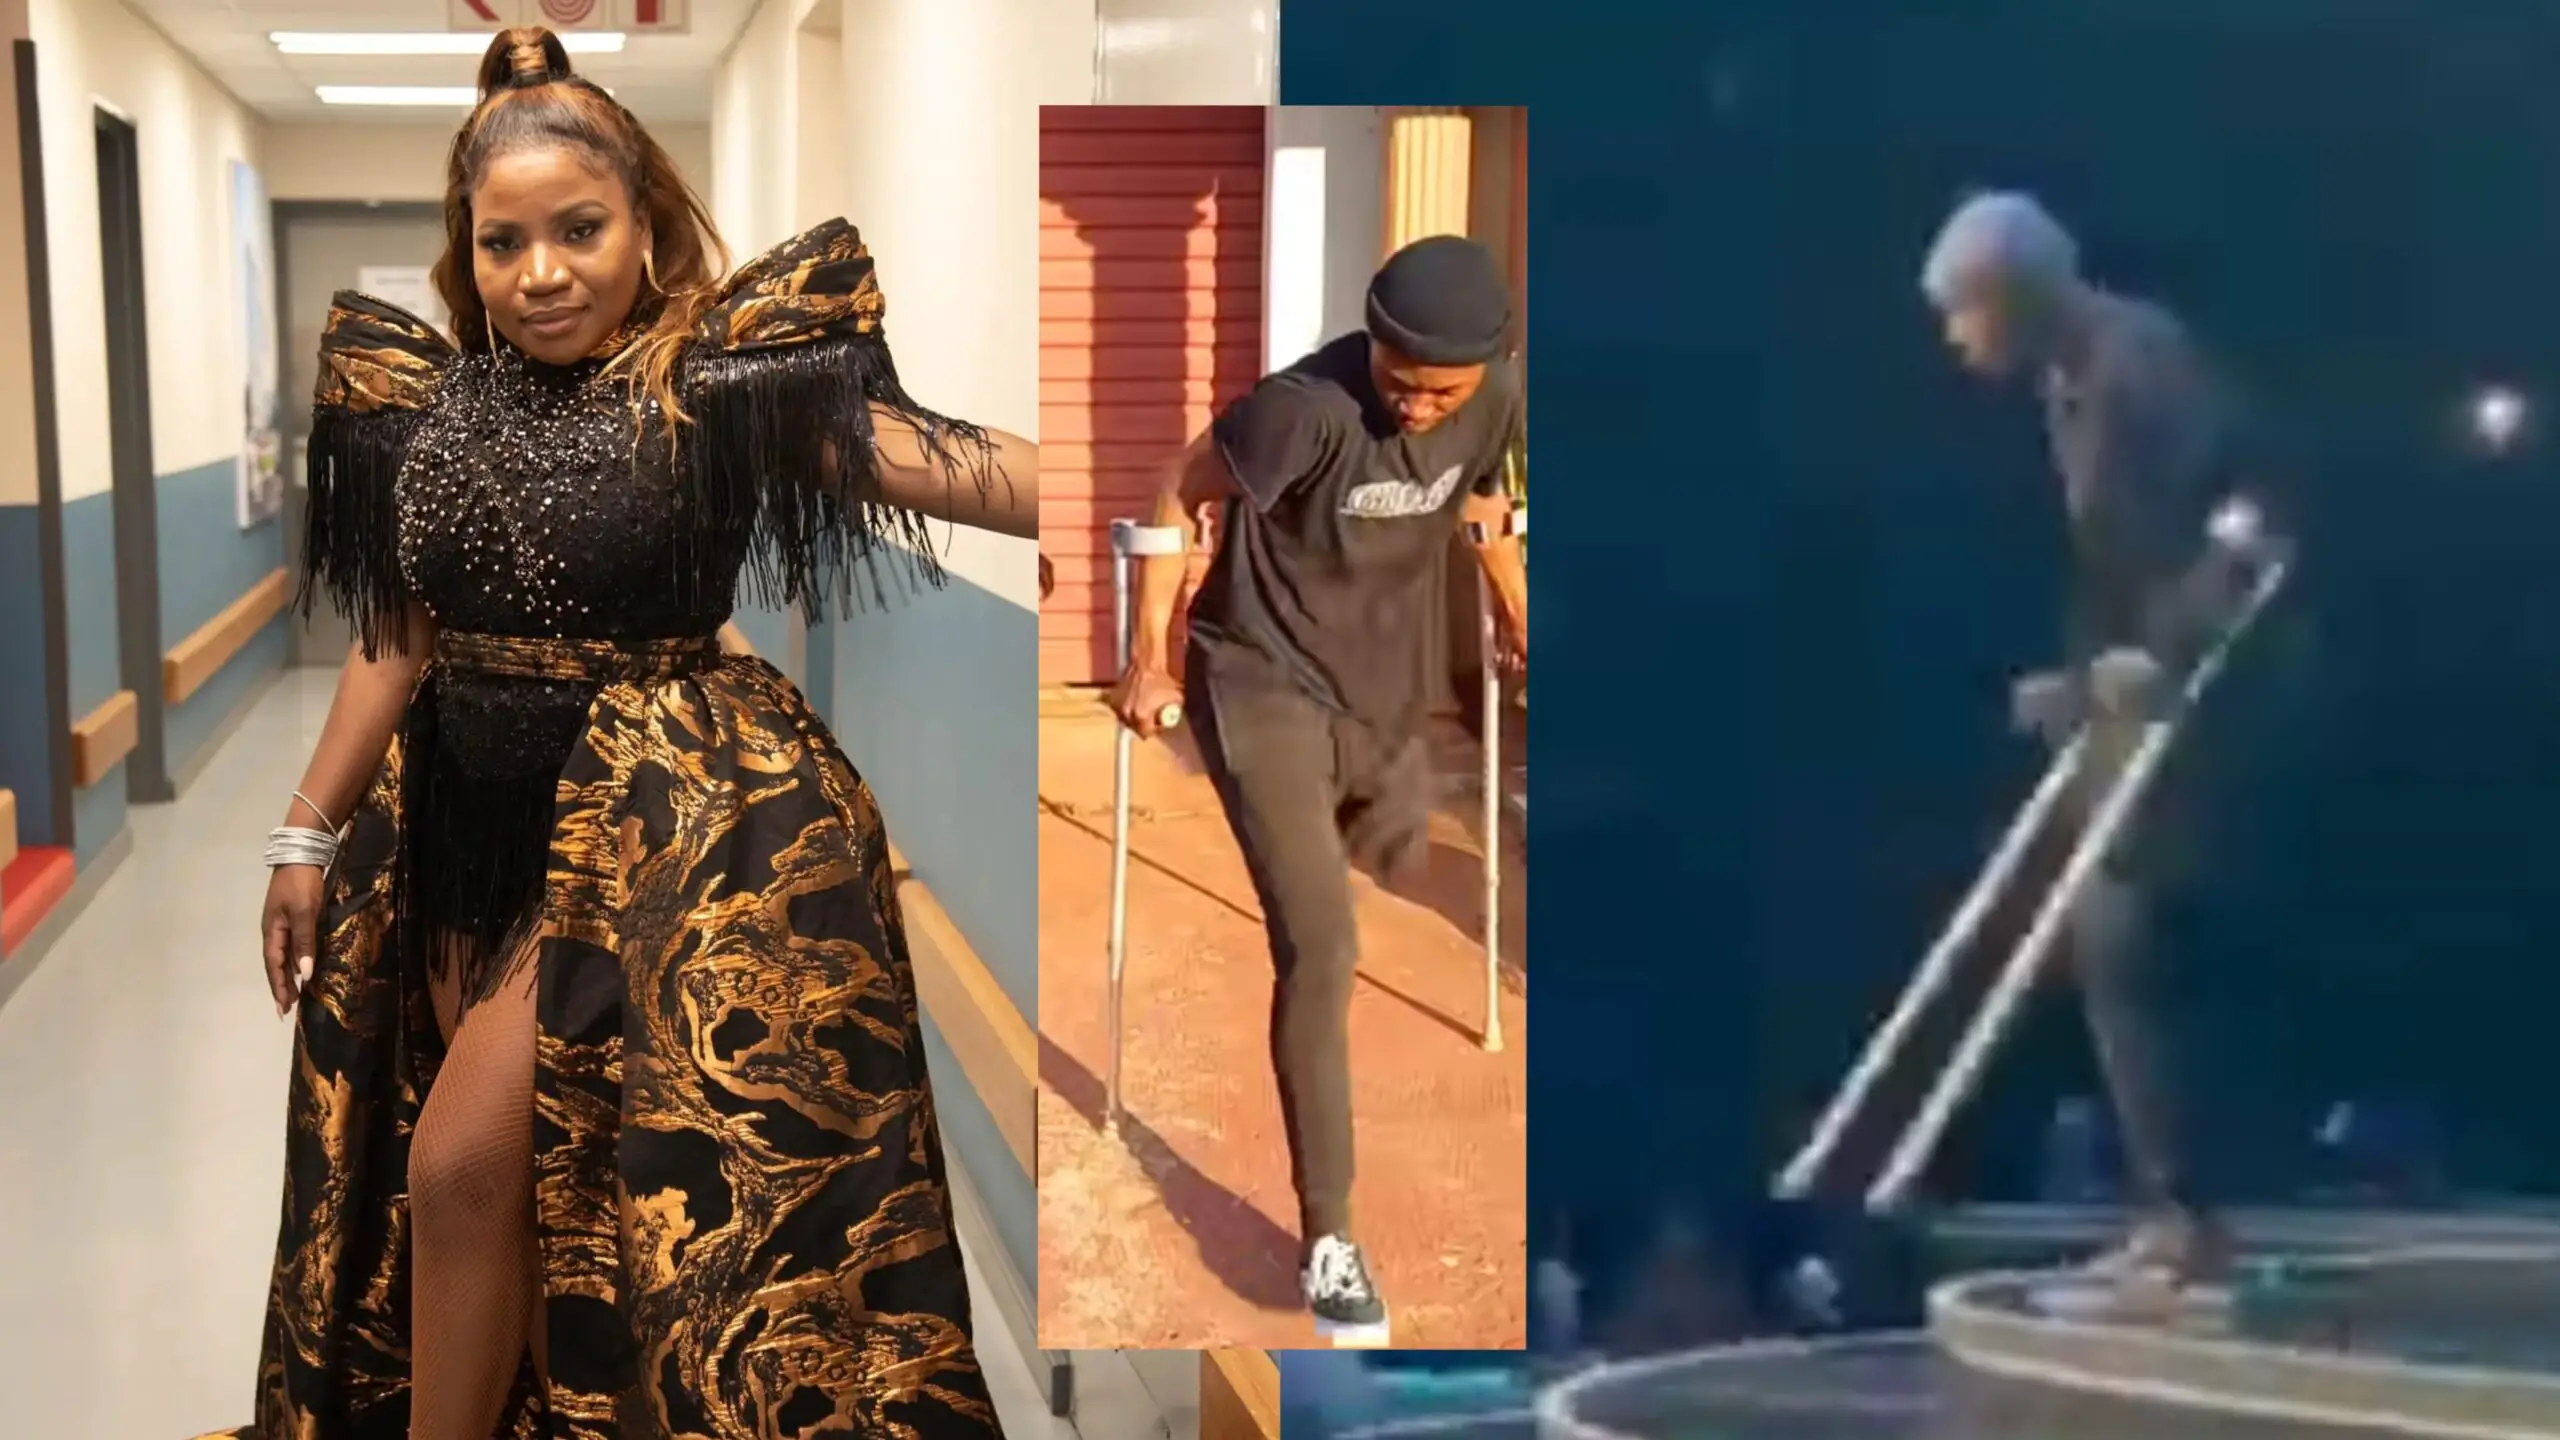 Watch as Makhadzi perfoms with a one legged dancer